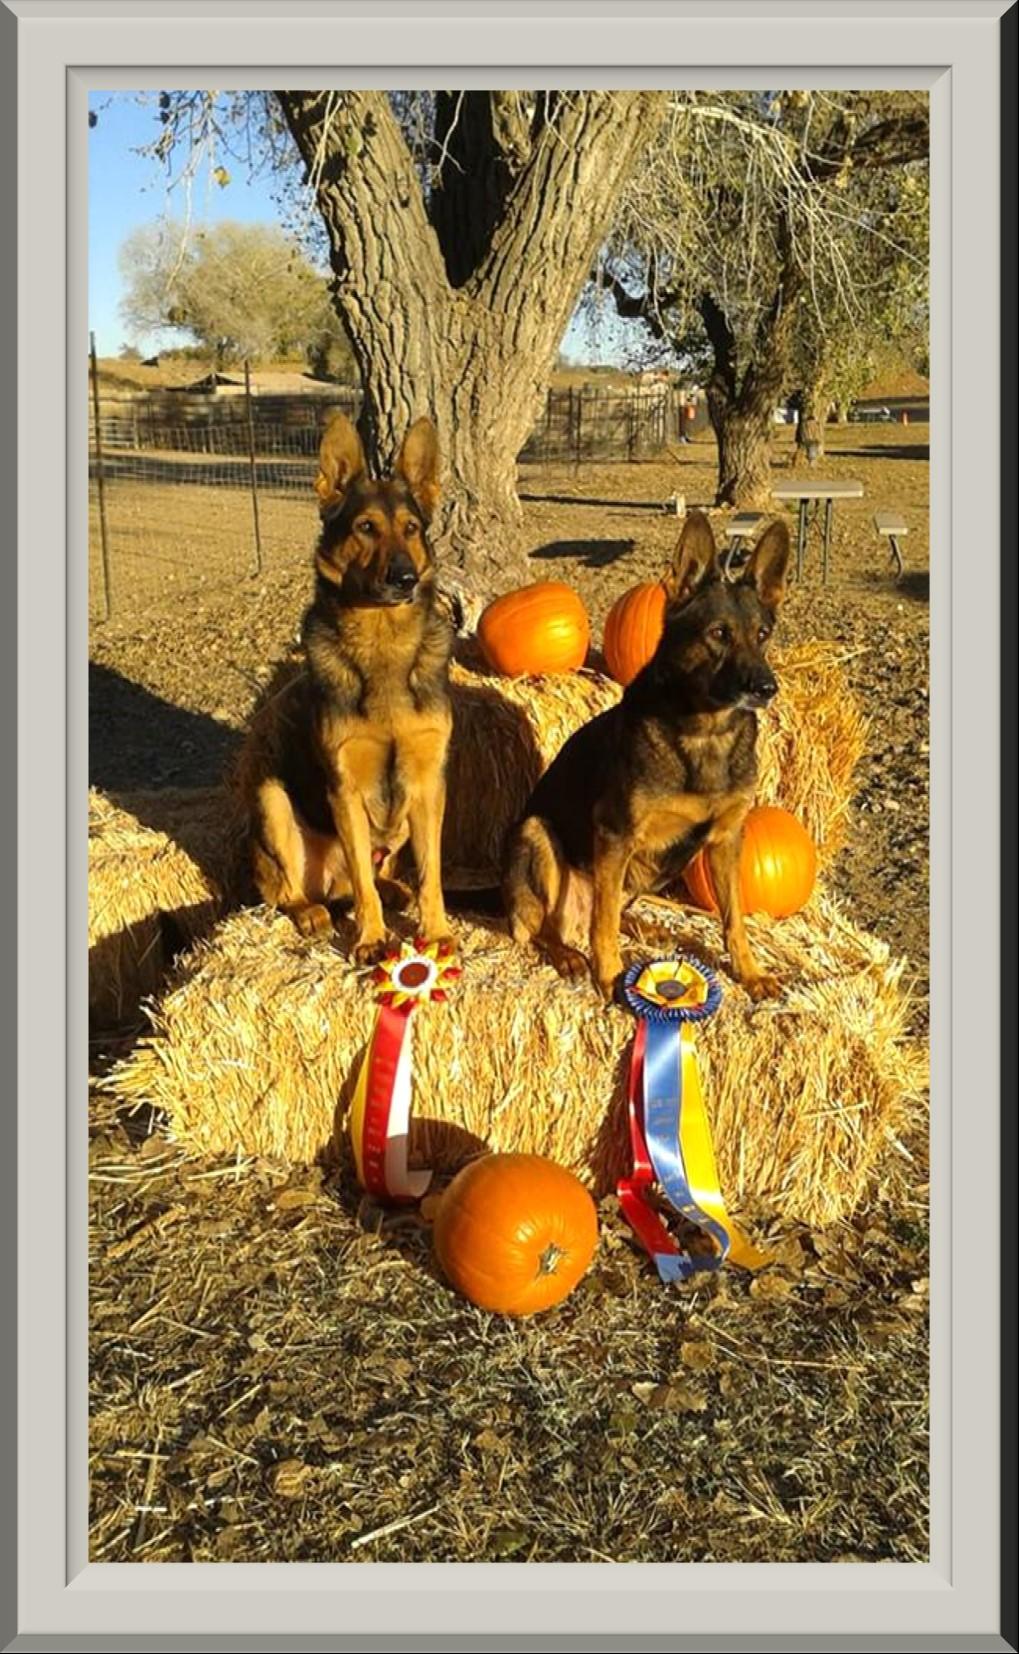 Dawna, handler and trainer, and Rach with Deb Pollard and Ron Fischer, judges, holding Rach's High in Trial ribbons